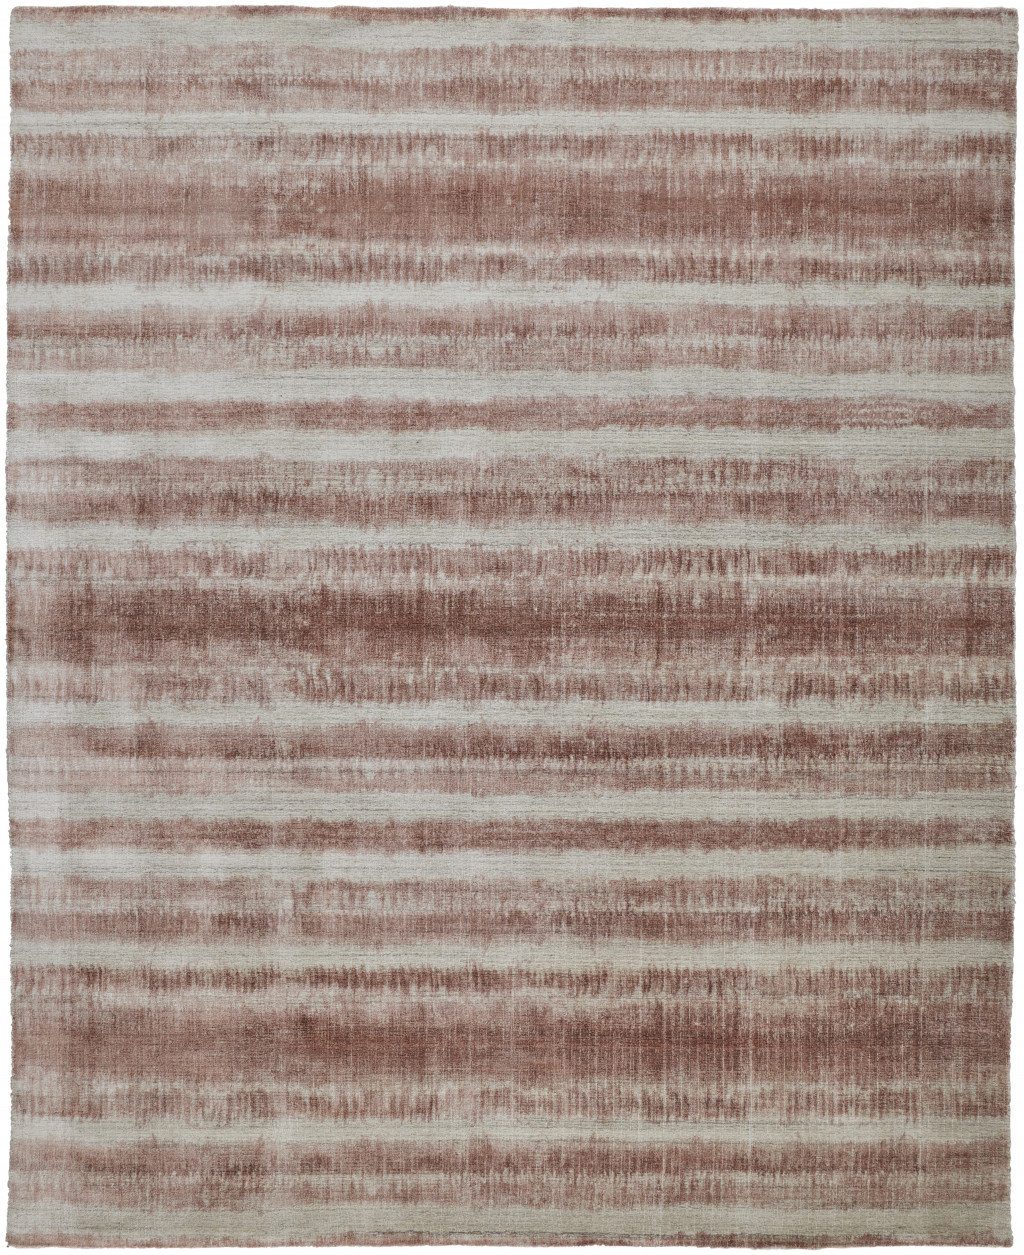 5' X 8' Tan Ivory And Pink Abstract Hand Woven Area Rug-514422-1